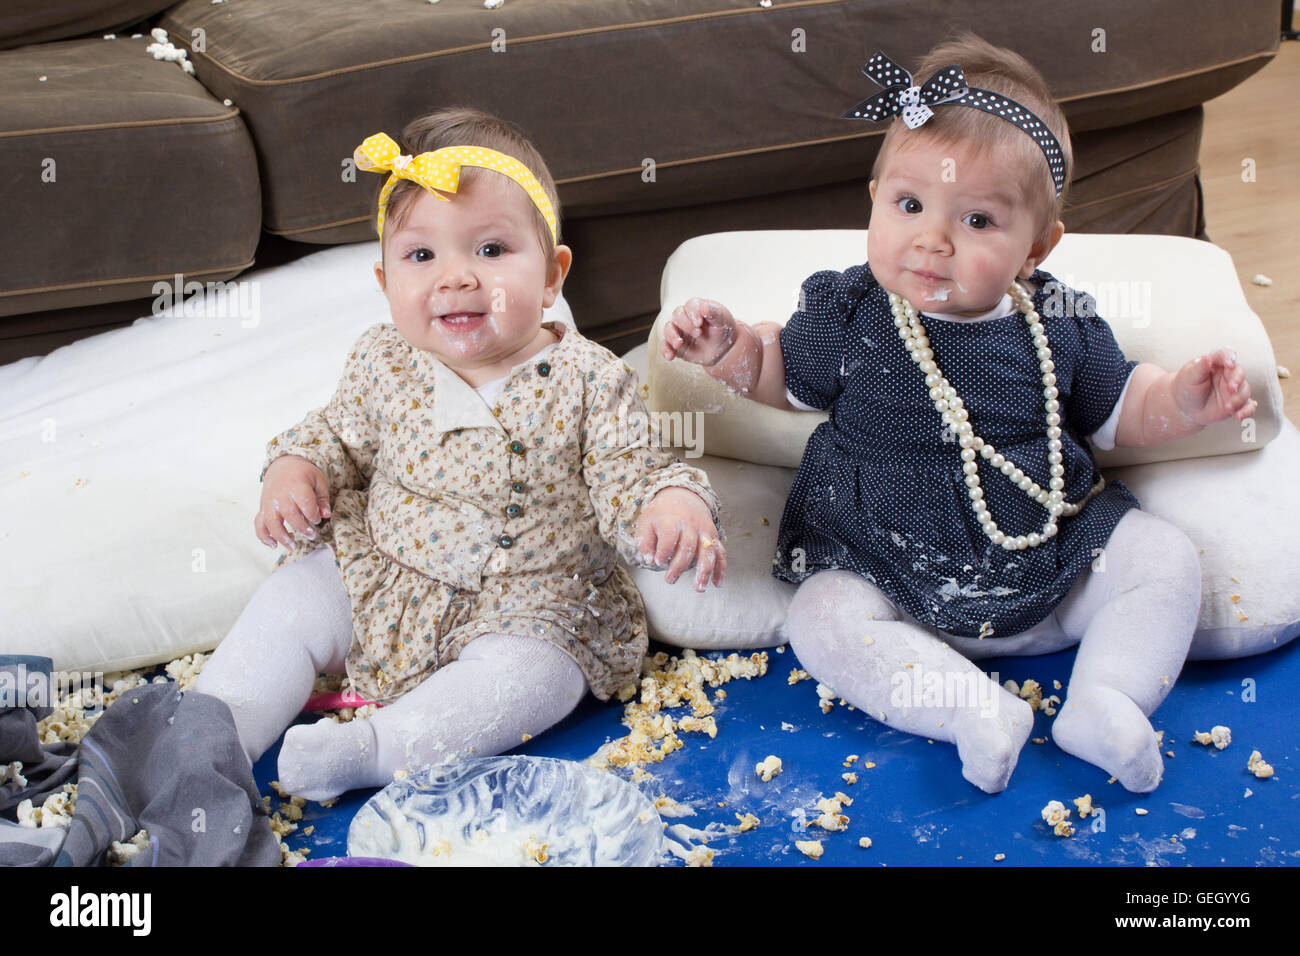 introducing food to baby, happy twin babies making a mess Stock Photo